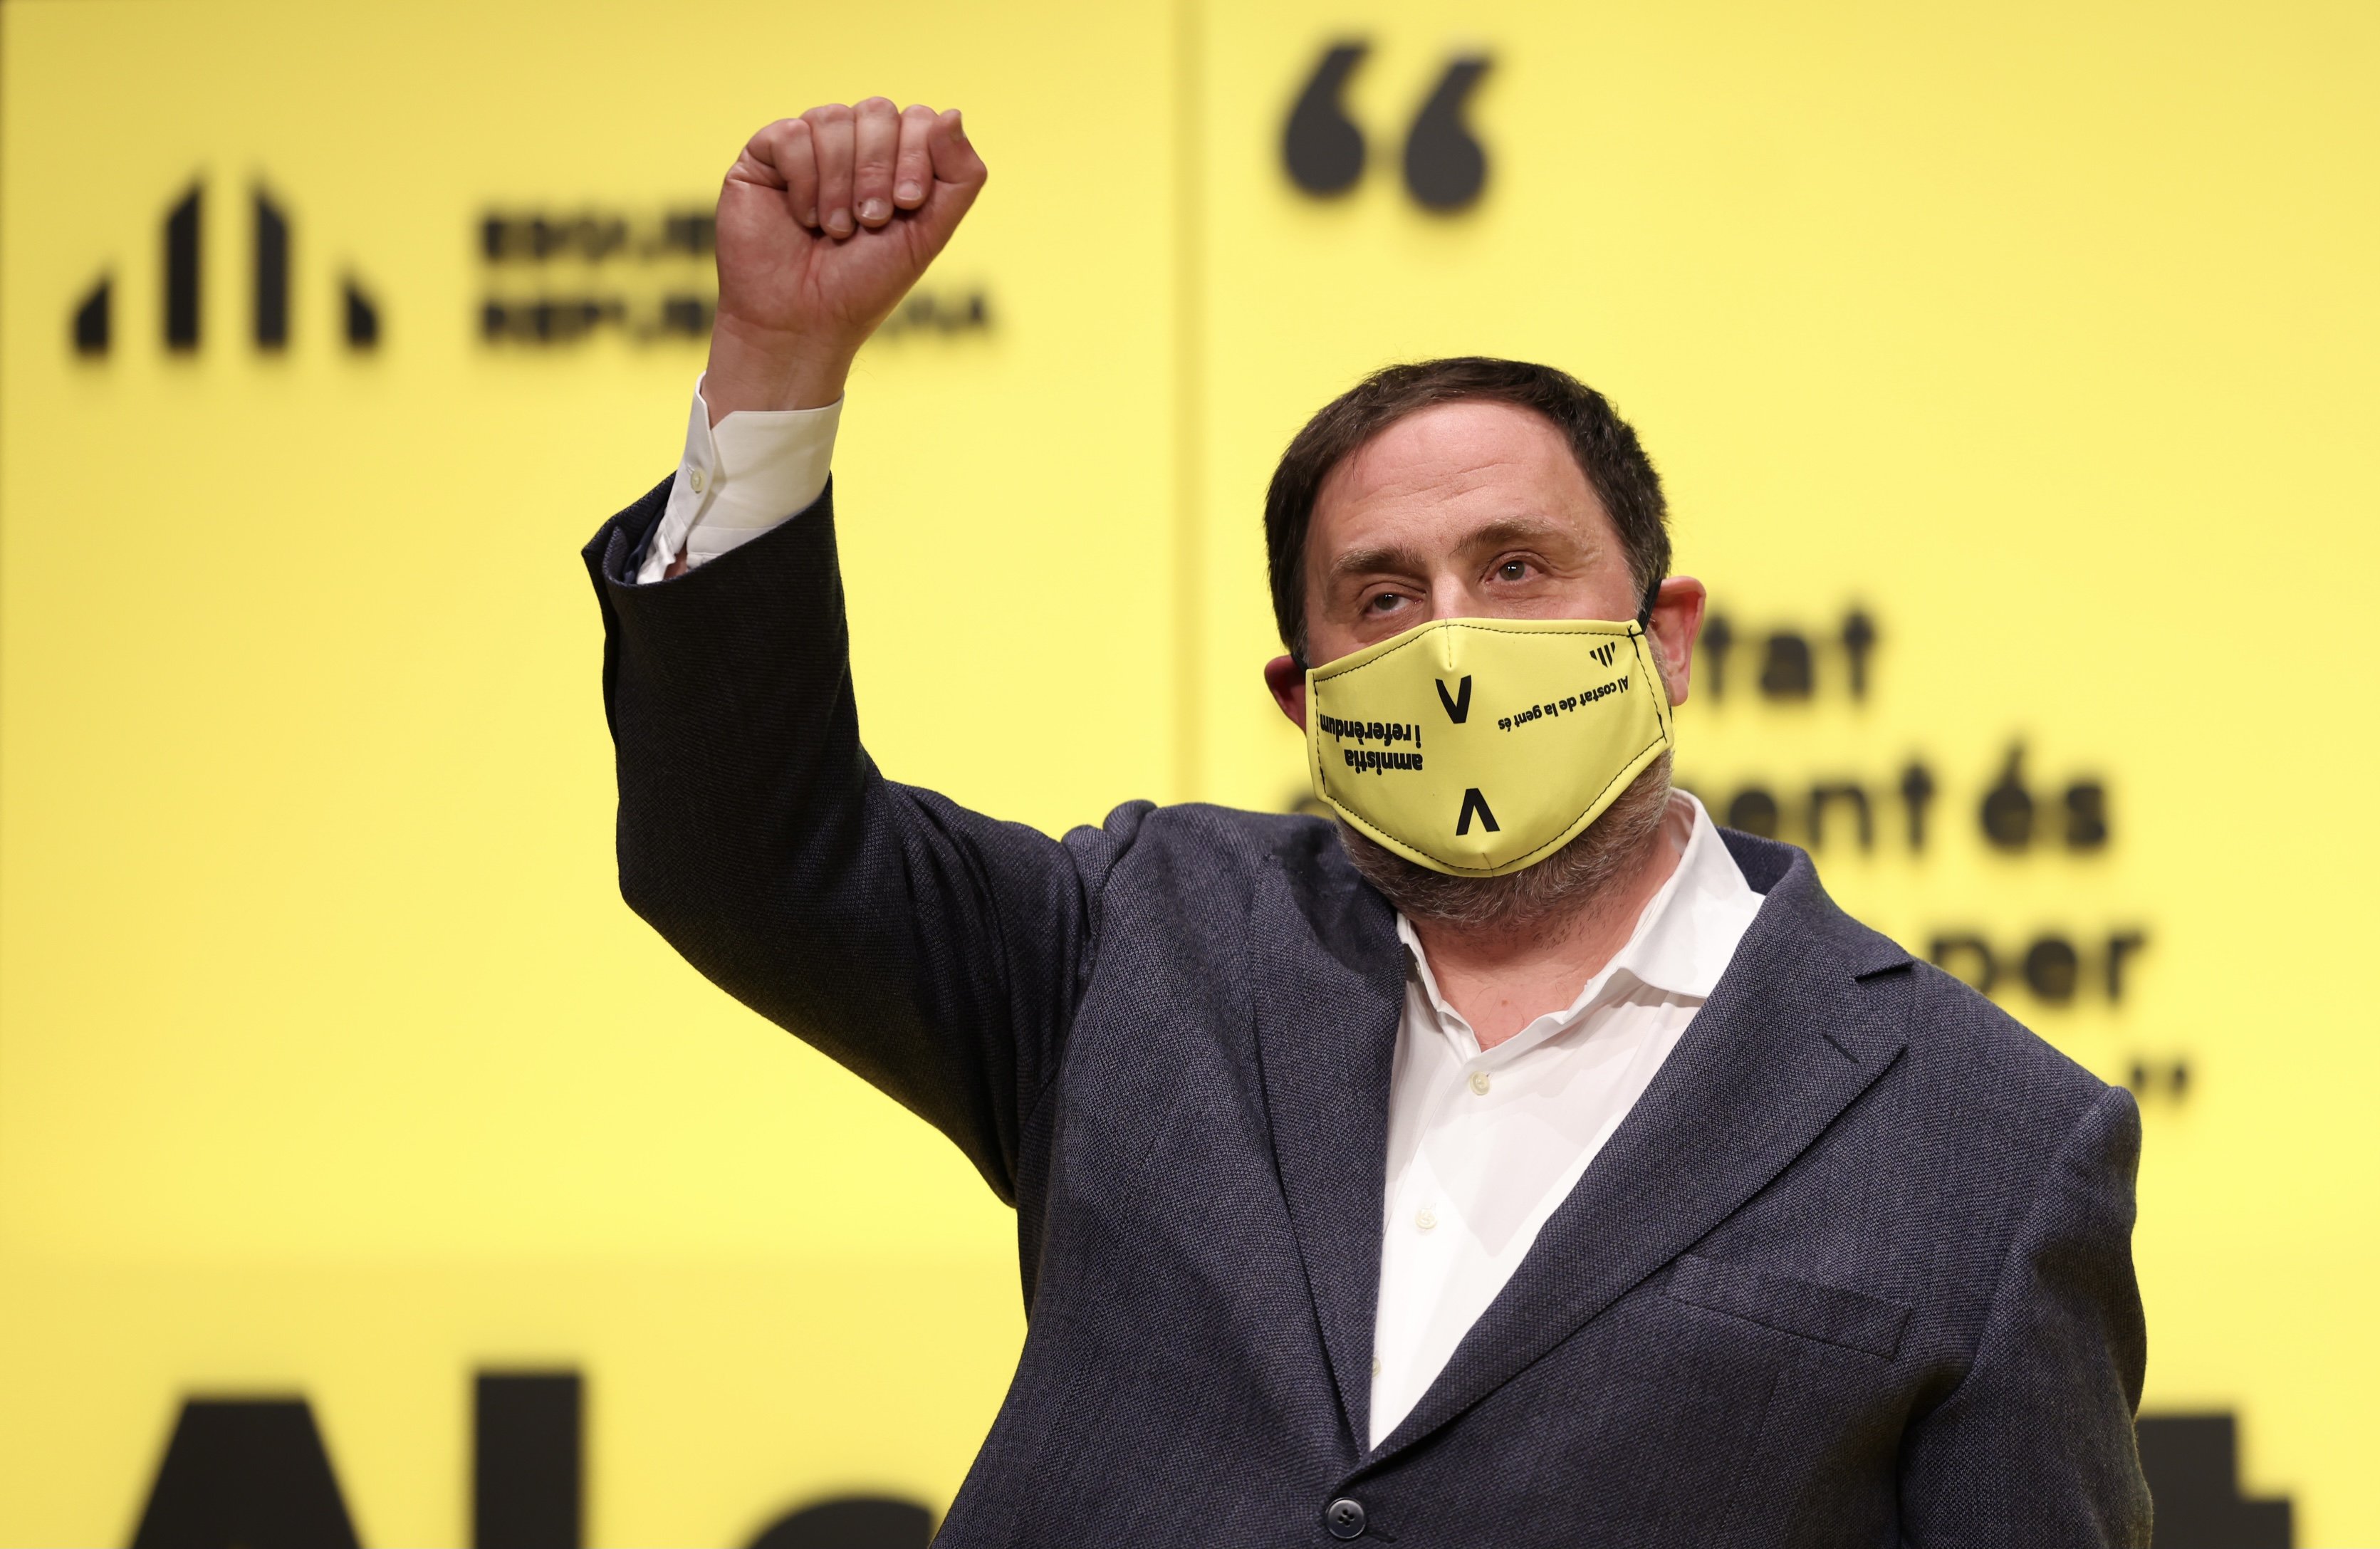 Junqueras backs 4-party executive: "We don't want to choose between Junts and Comuns"